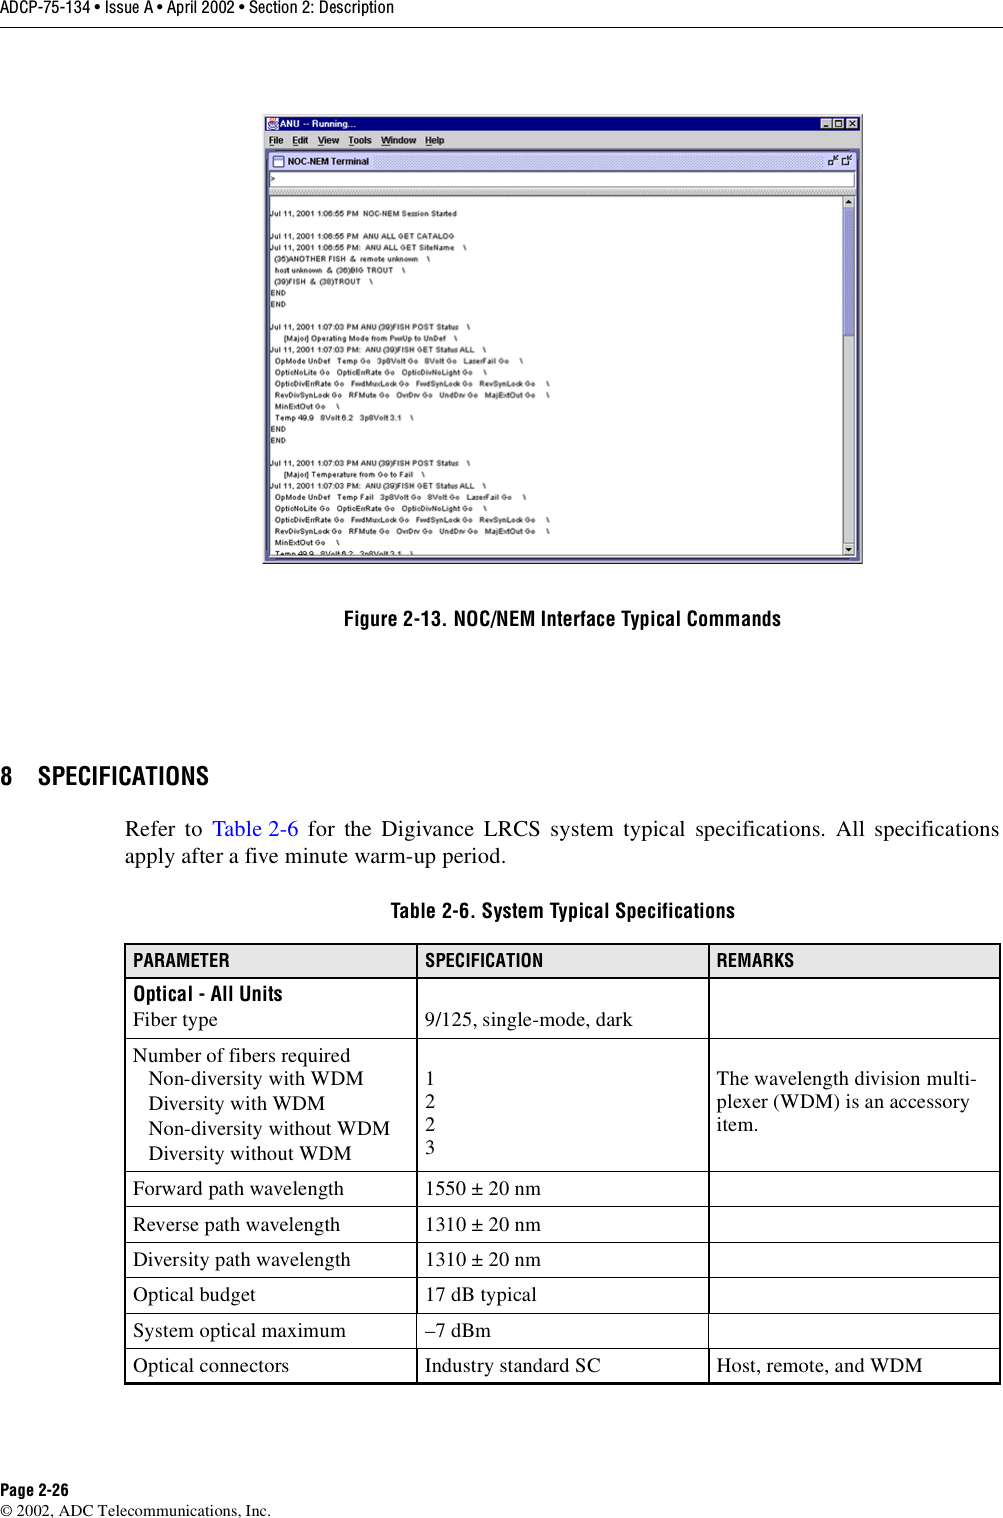 ADCP-75-134 • Issue A • April 2002 • Section 2: DescriptionPage 2-26©2002, ADC Telecommunications, Inc.Figure 2-13. NOC/NEM Interface Typical Commands8 SPECIFICATIONSRefer to Table 2-6 for the Digivance LRCS system typical specifications. All specificationsapply after afive minute warm-up period.Table 2-6. System Typical SpecificationsPARAMETER SPECIFICATION REMARKSOptical - All UnitsFiber type 9/125, single-mode, darkNumber of fibers requiredNon-diversity with WDMDiversity with WDMNon-diversity without WDMDiversity without WDM1223The wavelength division multi-plexer (WDM) is an accessoryitem.Forward path wavelength 1550 ±20 nmReverse path wavelength 1310 ±20 nmDiversity path wavelength 1310 ±20 nmOptical budget 17 dB typicalSystem optical maximum –7 dBmOptical connectors Industry standard SC Host, remote, and WDM